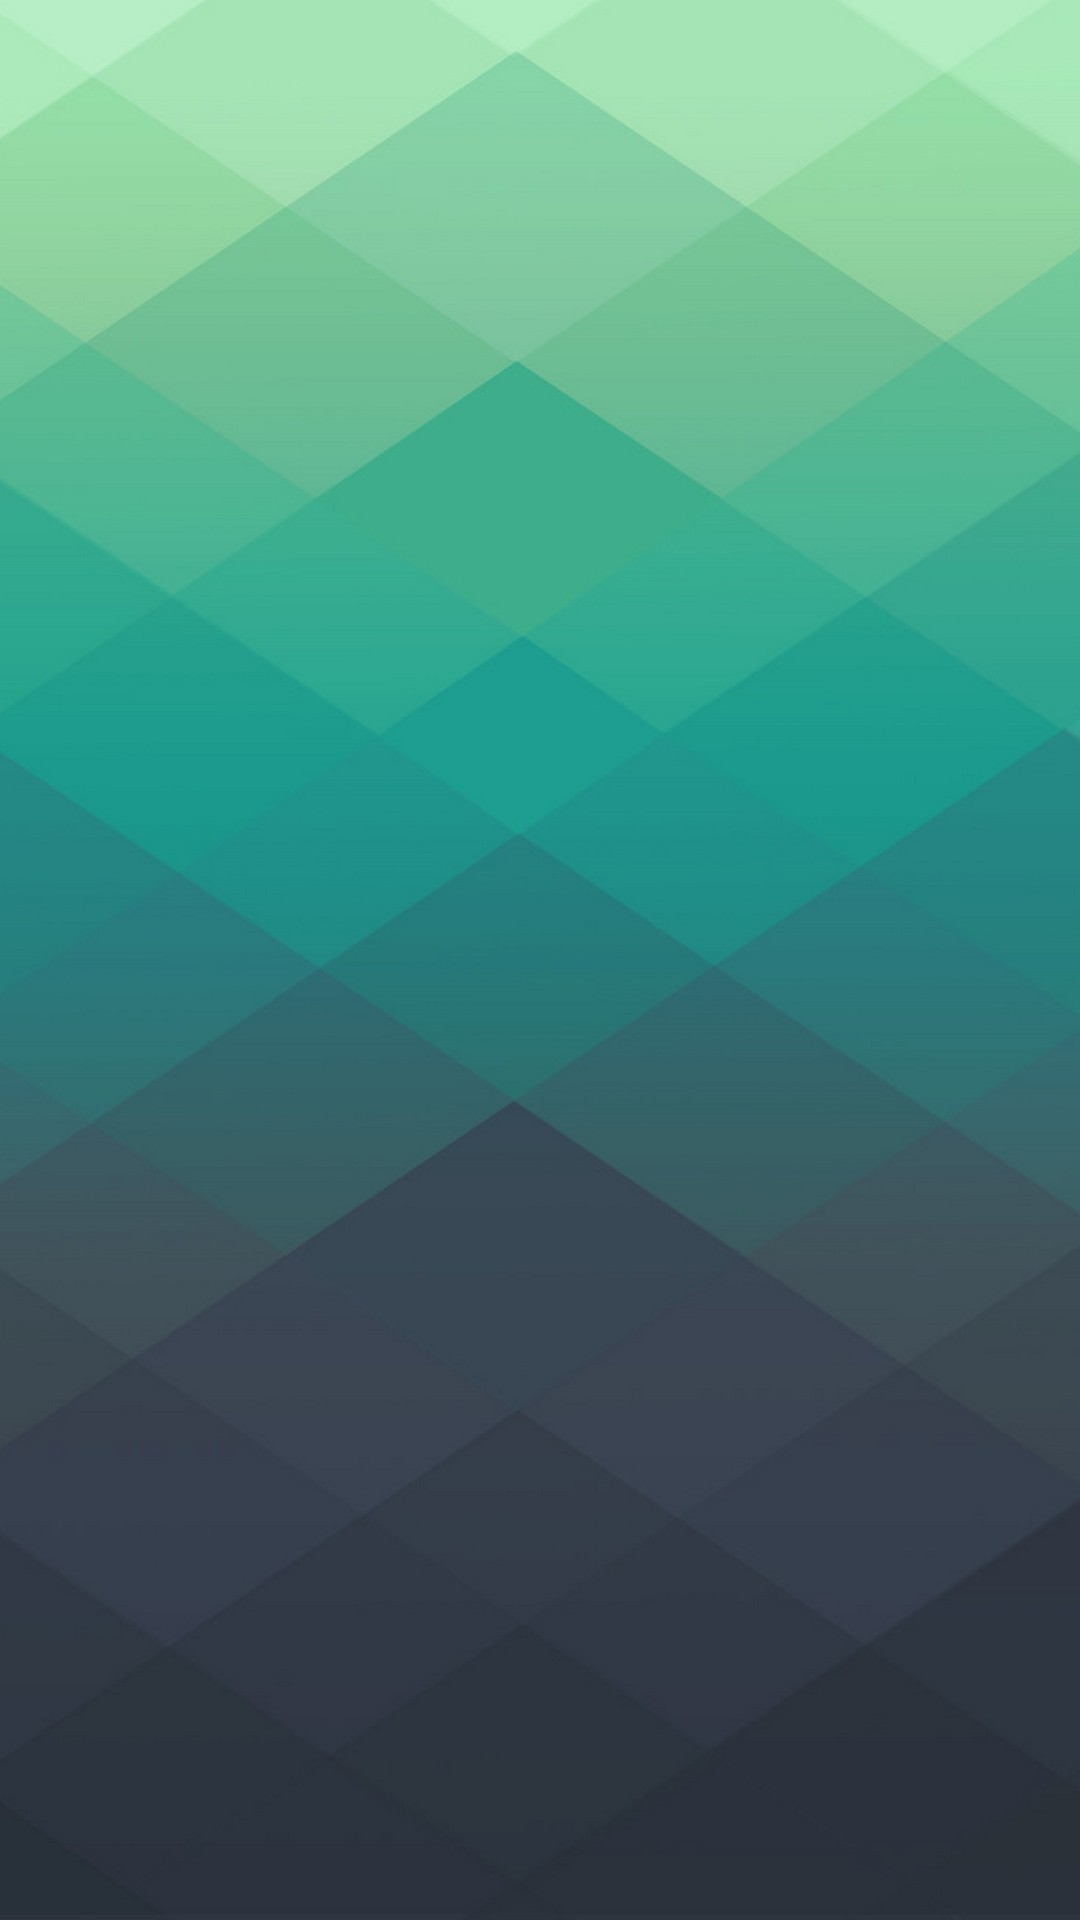 Android Wallpaper Geometric with high-resolution 1080x1920 pixel. You can use this wallpaper for your Android backgrounds, Tablet, Samsung Screensavers, Mobile Phone Lock Screen and another Smartphones device